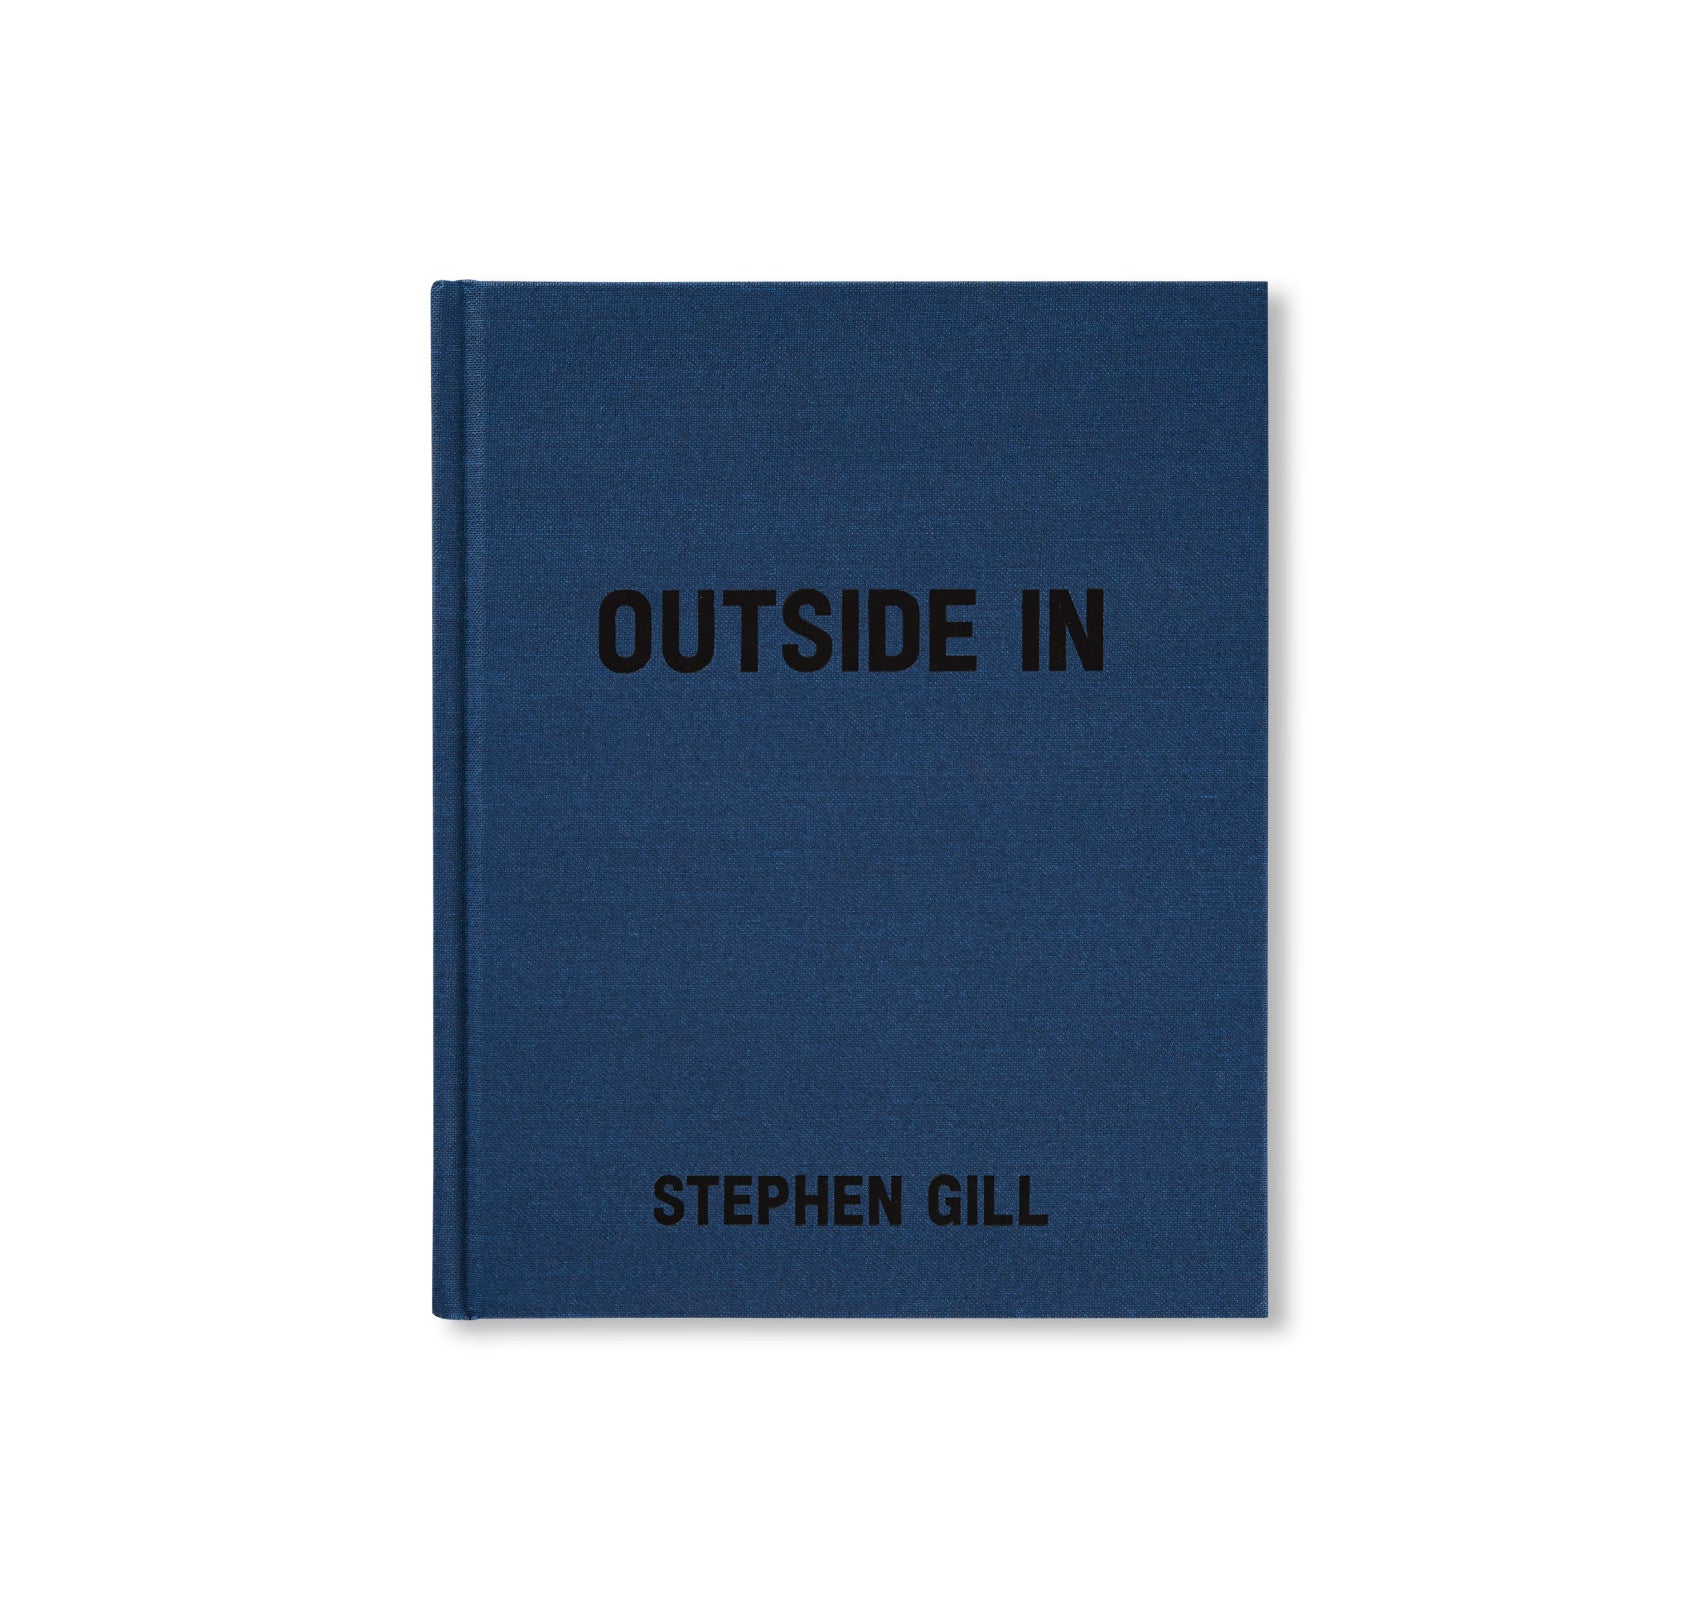 OUTSIDE IN by Stephen Gill